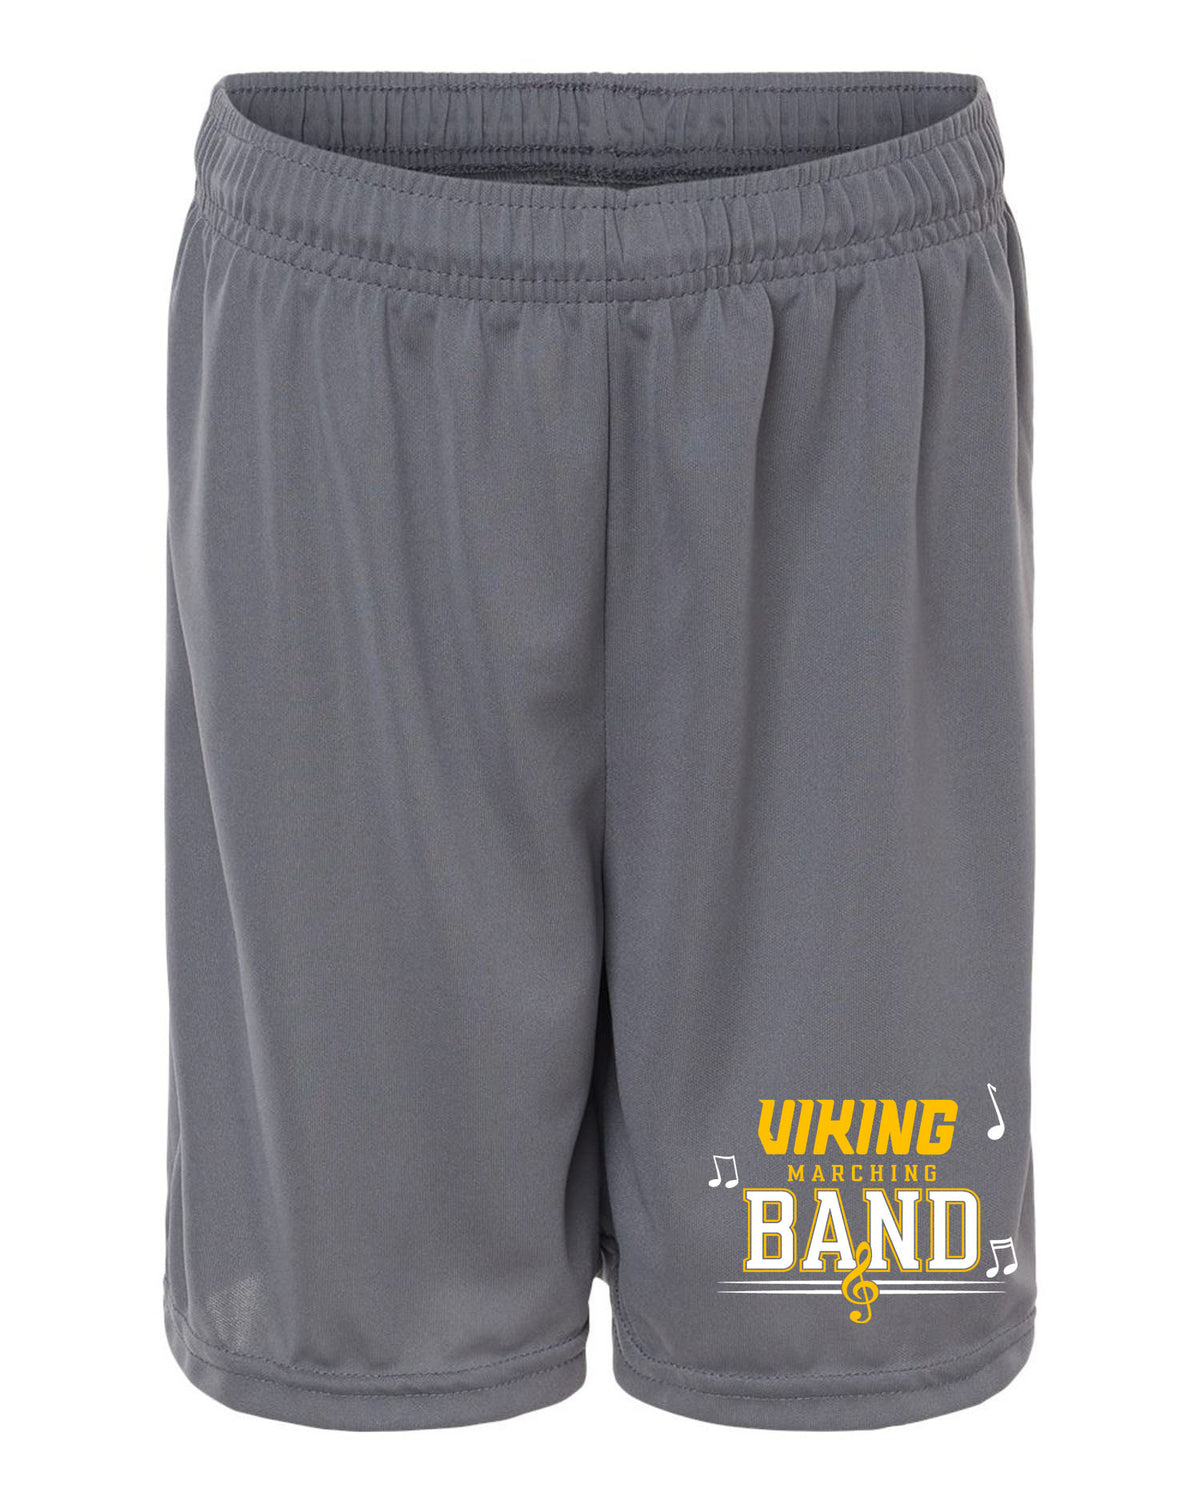 Vernon Marching Band Performance Shorts Design 5